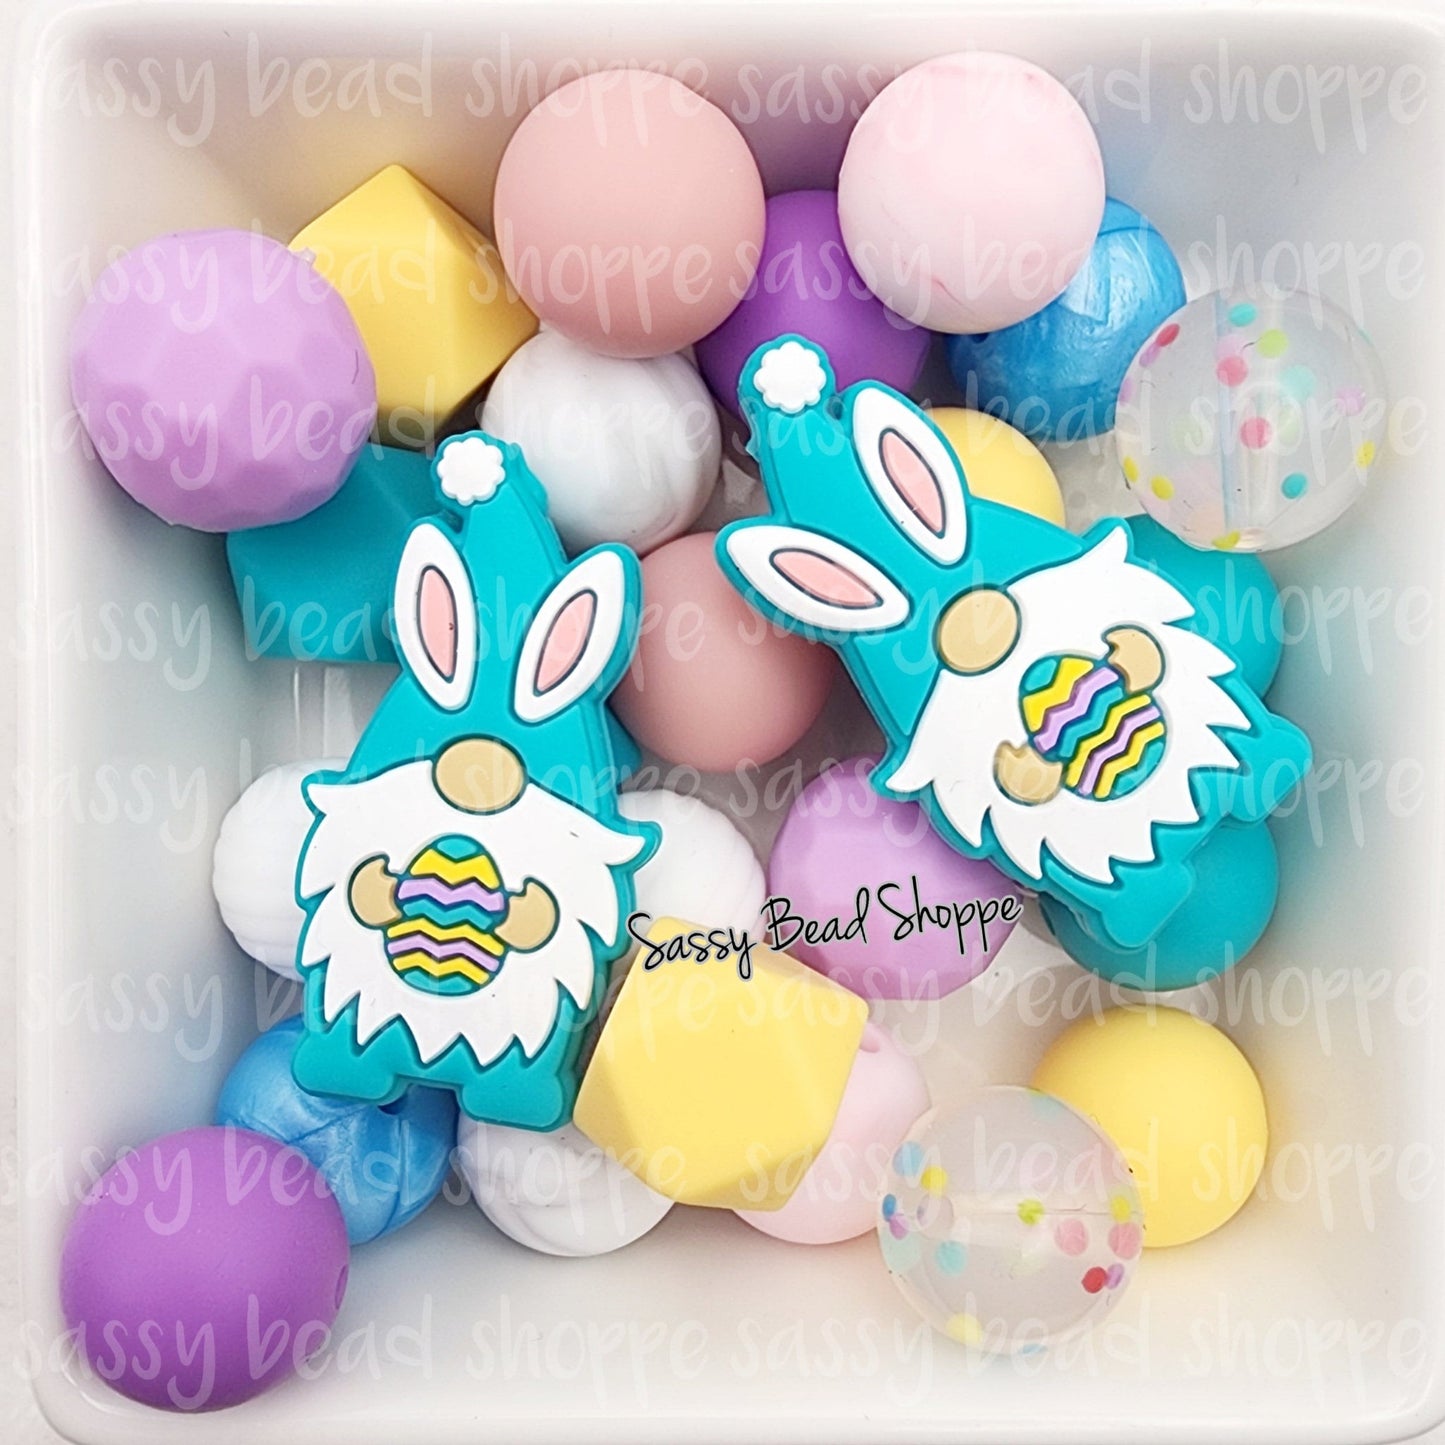 Easter Time Silicone Bead Mix, Round, Set of 26, Bulk Mix of Silicone Beads, Beads for Pens, Silicone Beads, Wristlet, Keychain, Lanyard